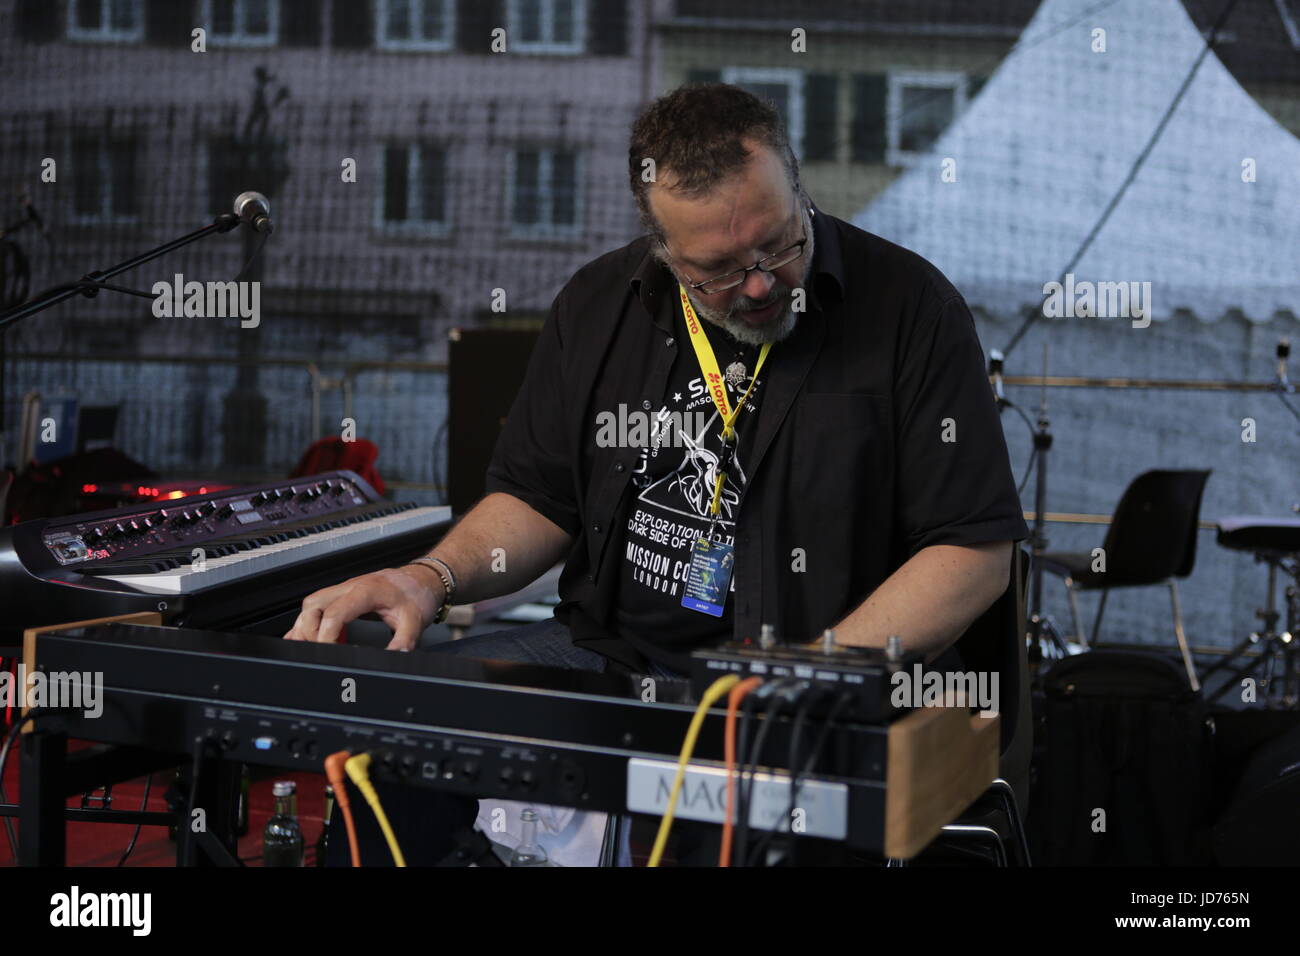 Worms, Germany. 18th June 2017. Frank Tischer from the Miller Anderson Band  plays the keyboards live on stage at the 2017 Jazz and Joy Festival in  Worms in Germany. Credit: Michael Debets/Alamy